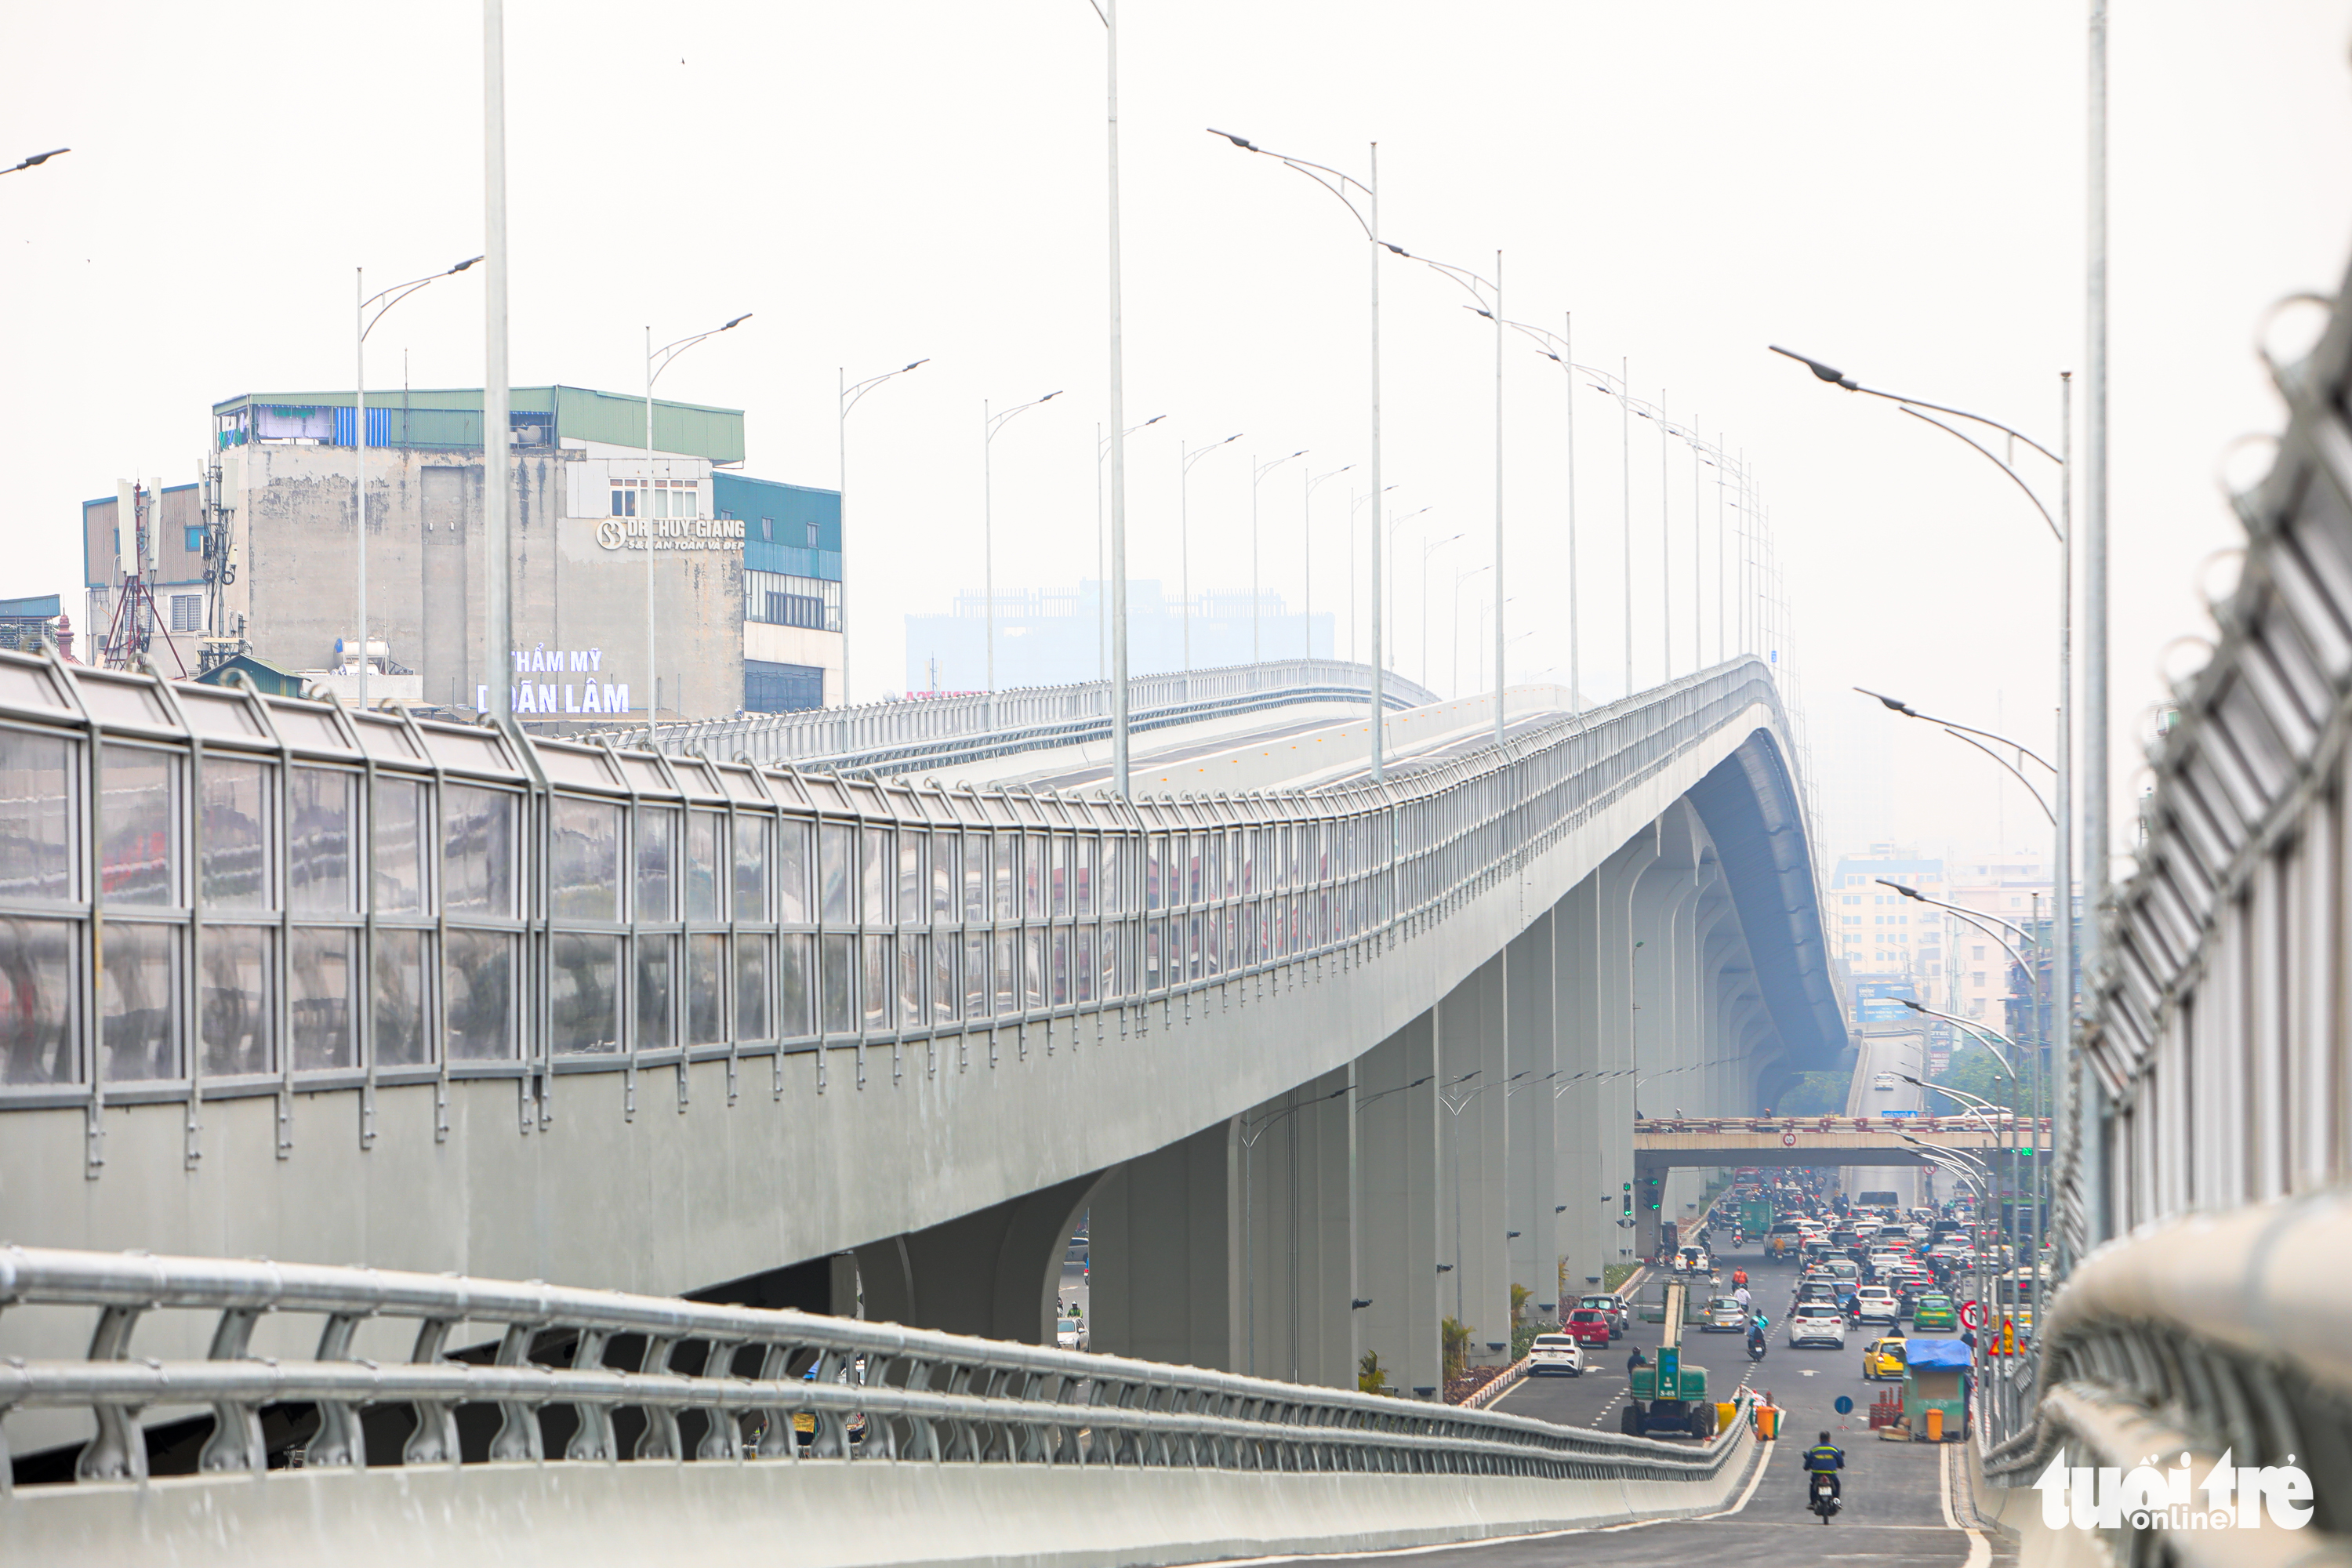 A view of the Nga Tu So - Vinh Tuy Bridge section of the Ring Road 2 project in Hanoi. Photo: Danh Khang / Tuoi Tre